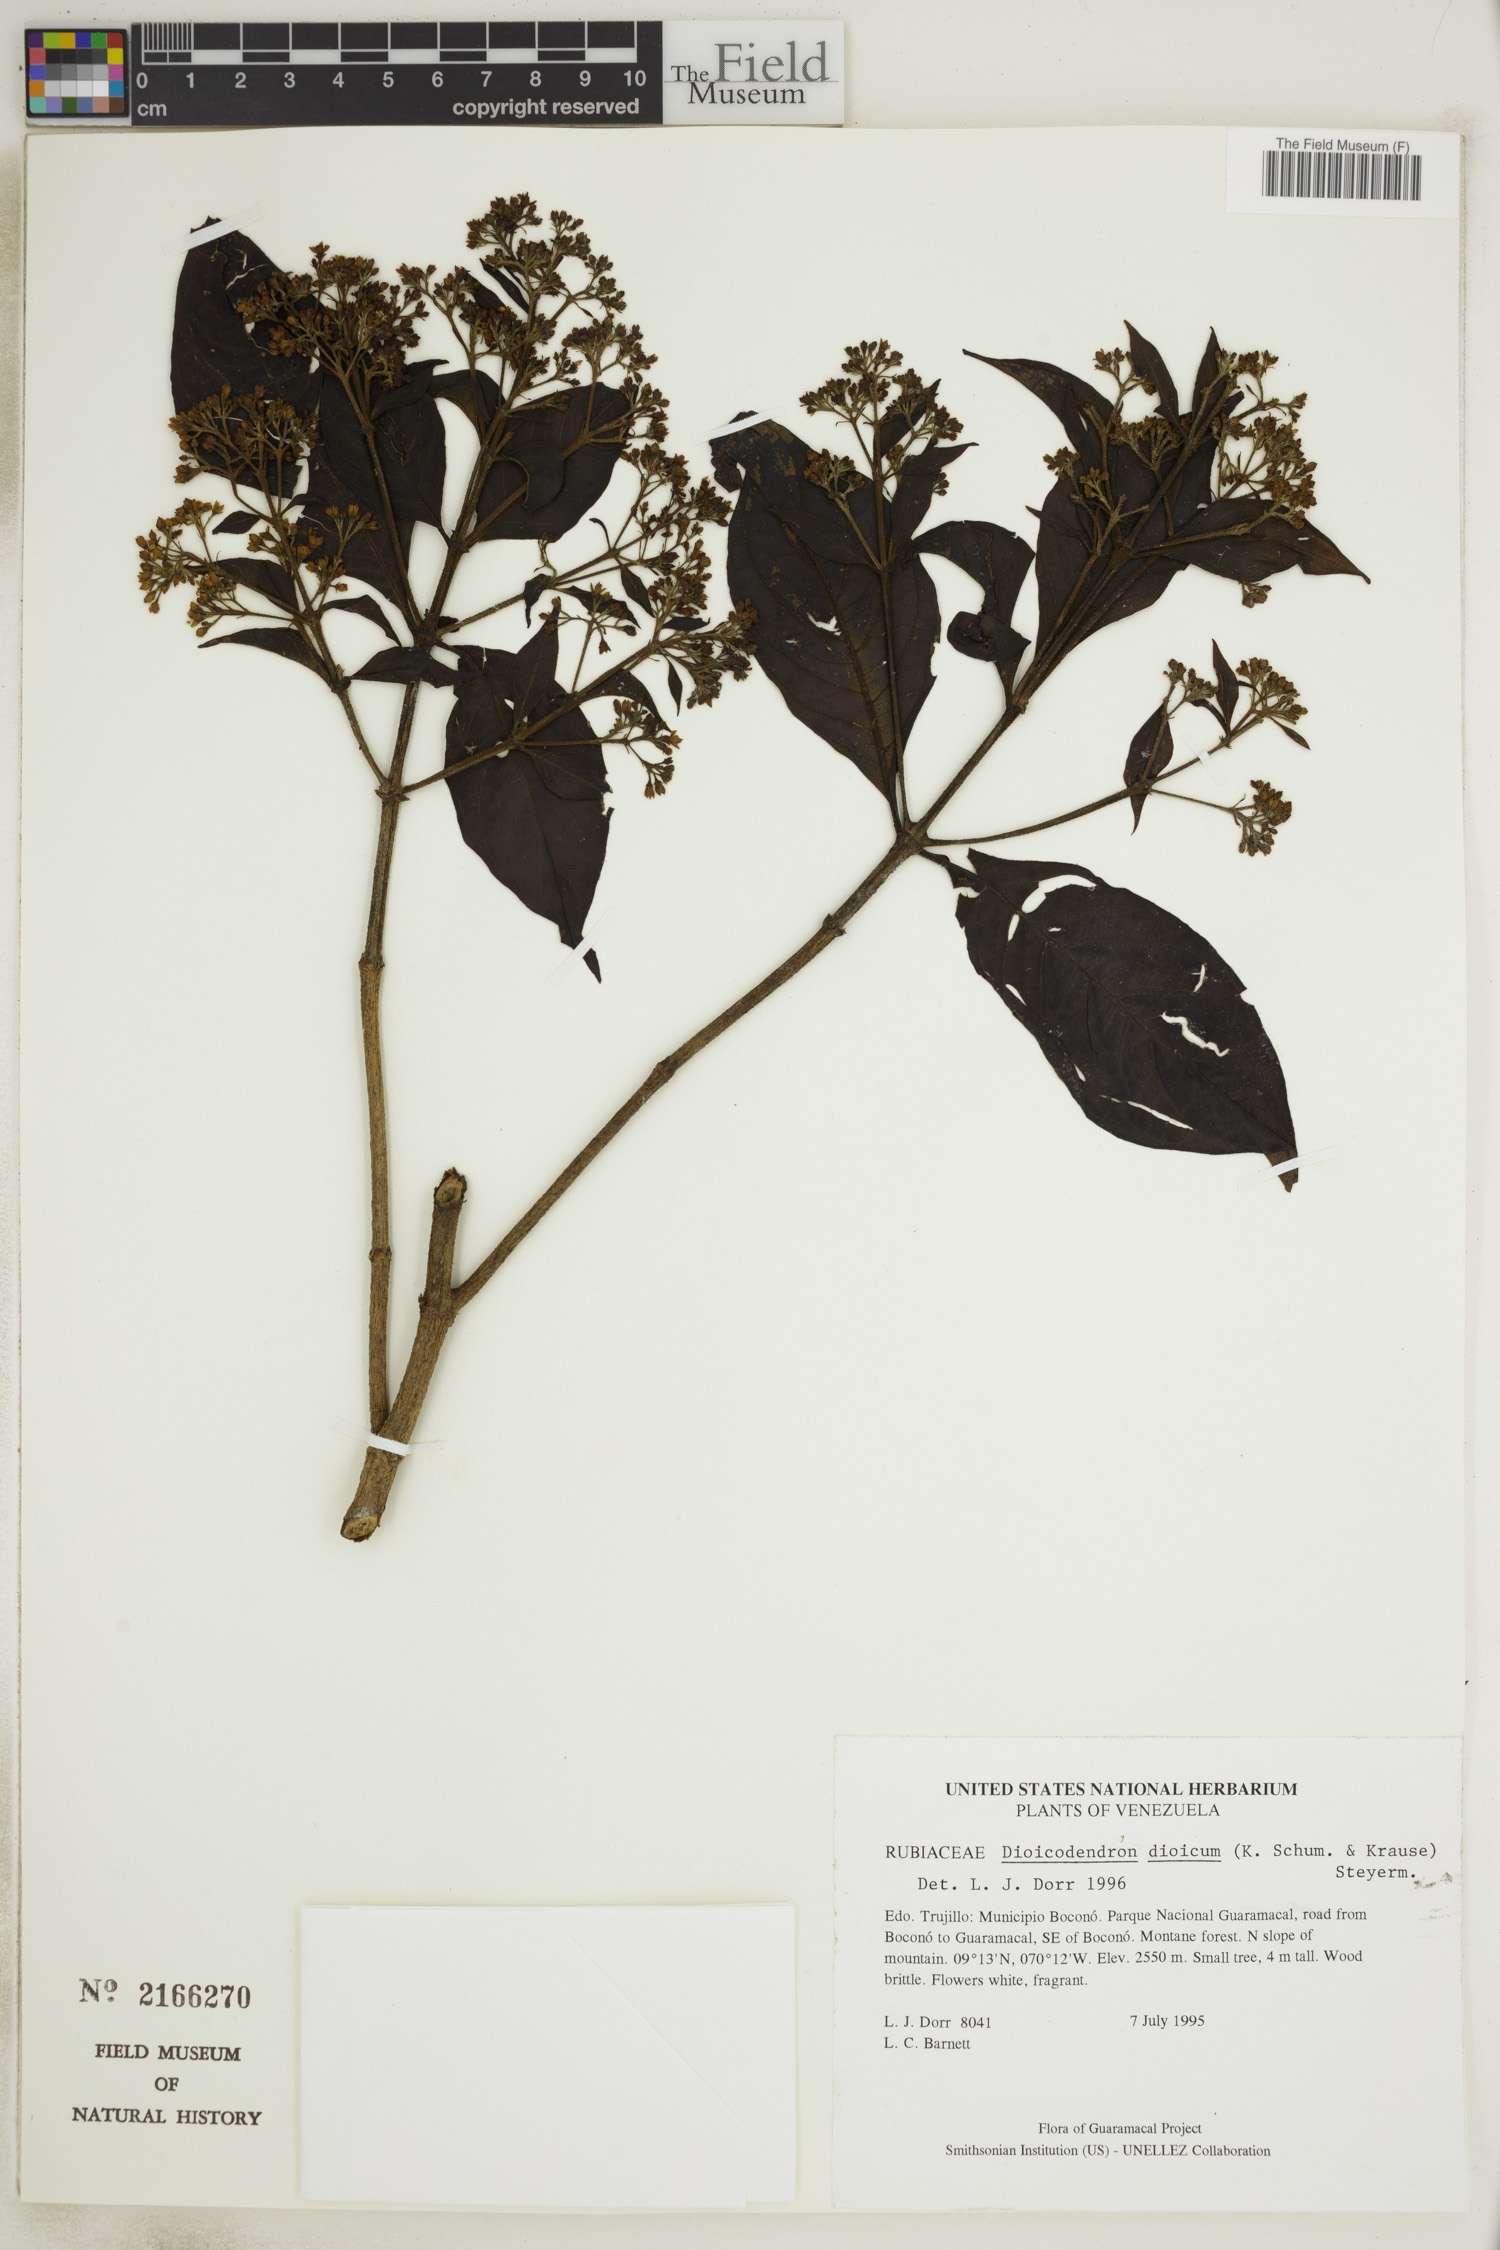 Dioicodendron image